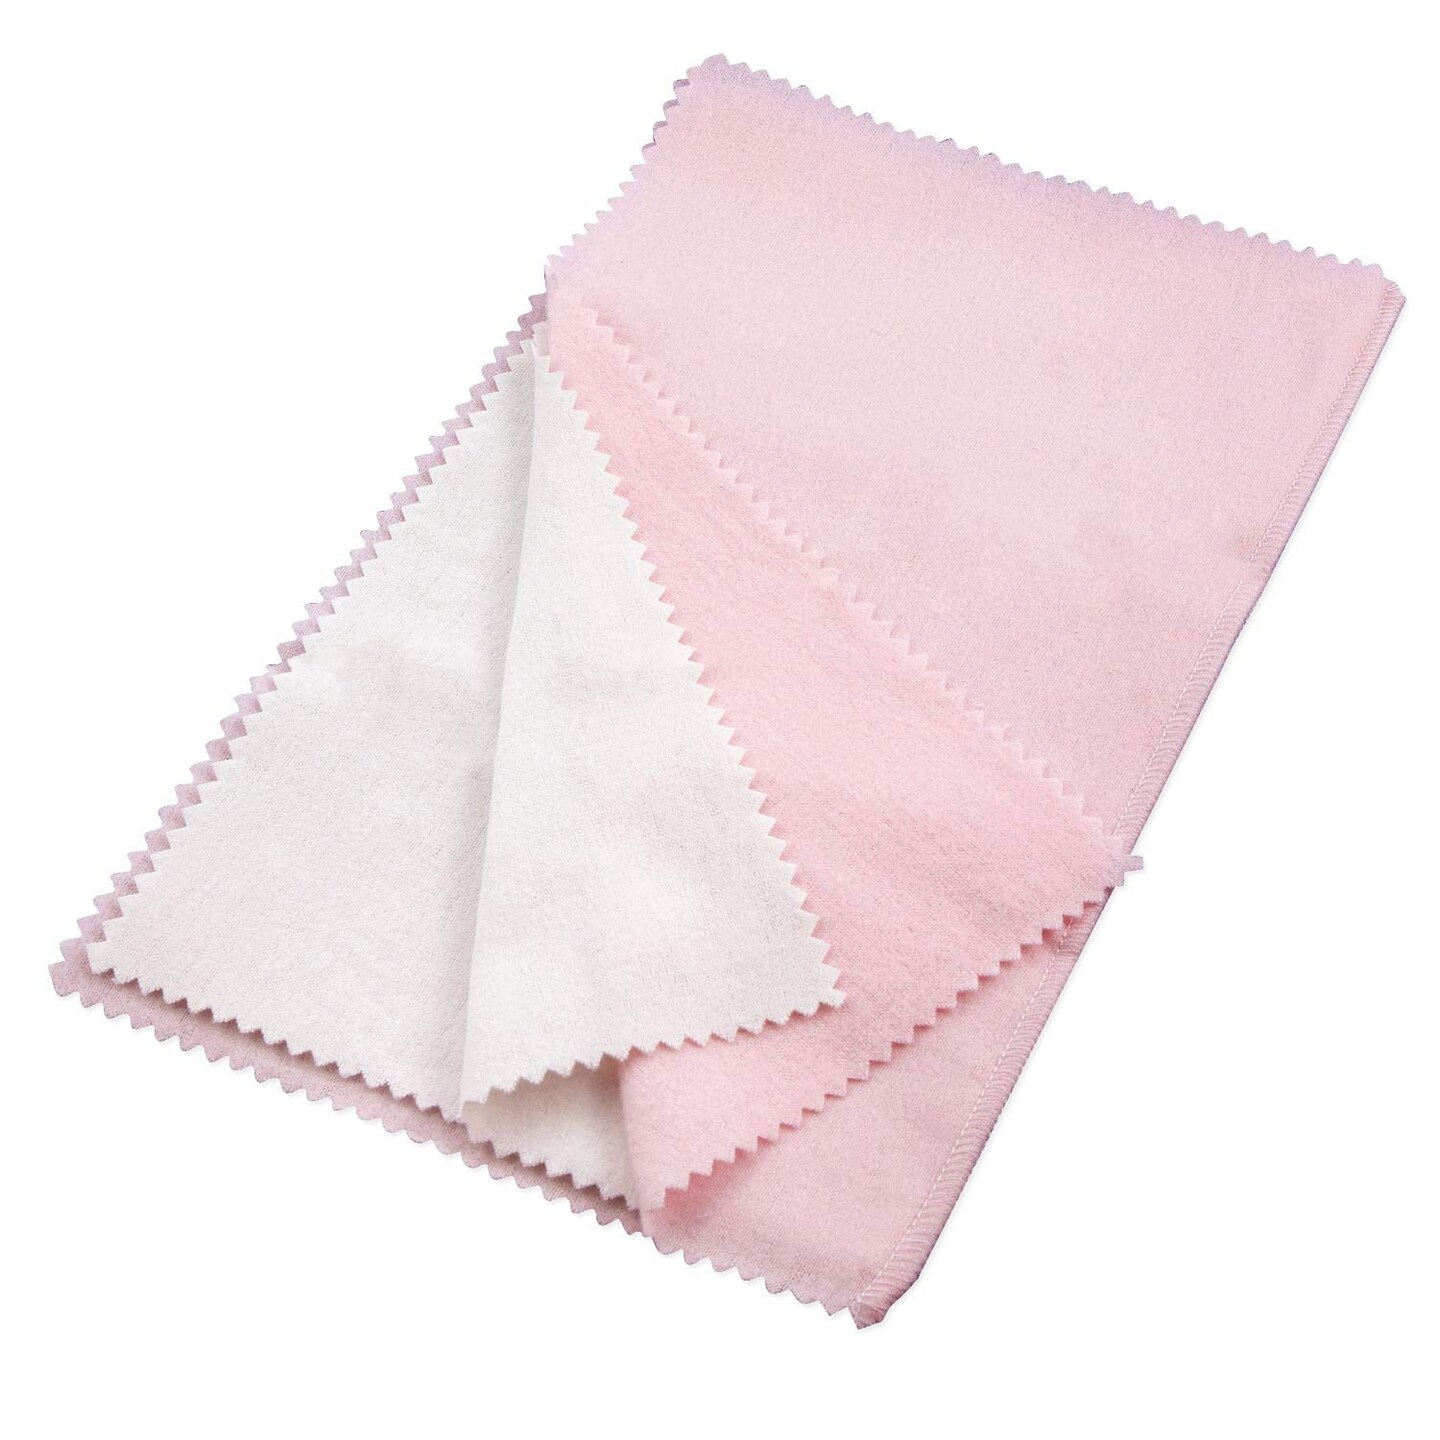 Jewelry Polishing Cloth - Findings Outlet